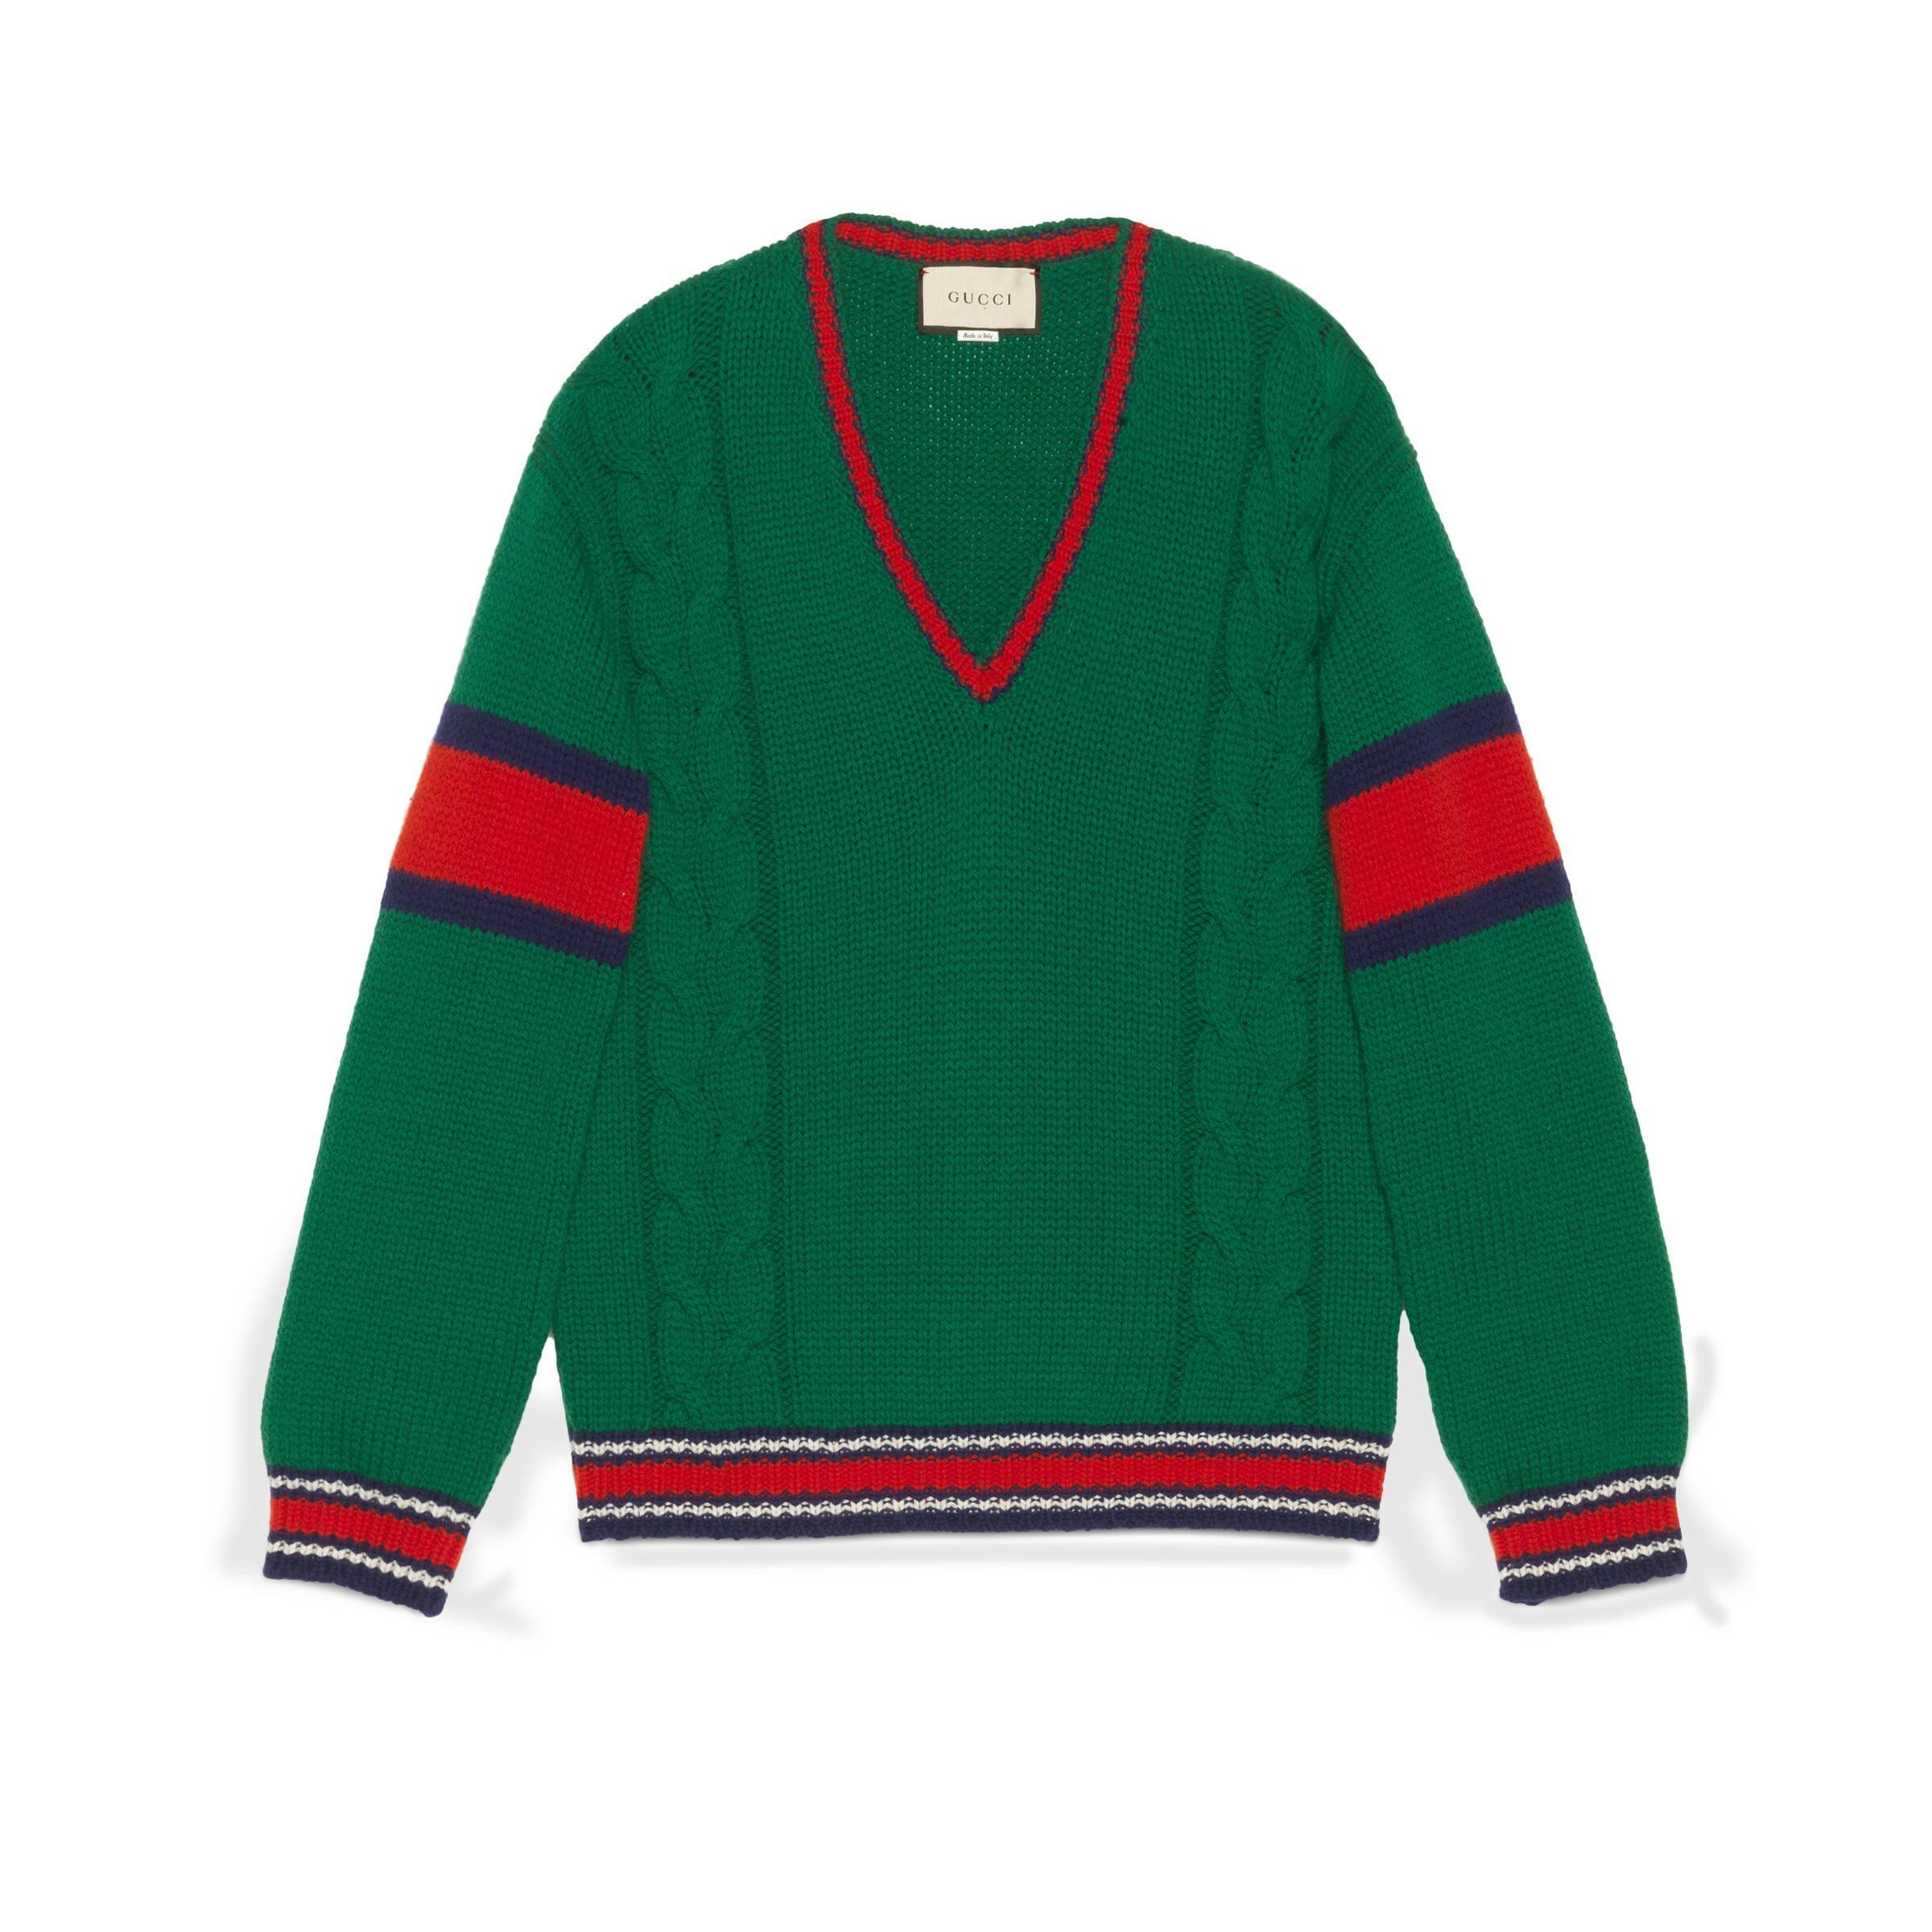 Gucci Wool Cable Knit V-neck Jumper in Green for Men - Save 4% - Lyst